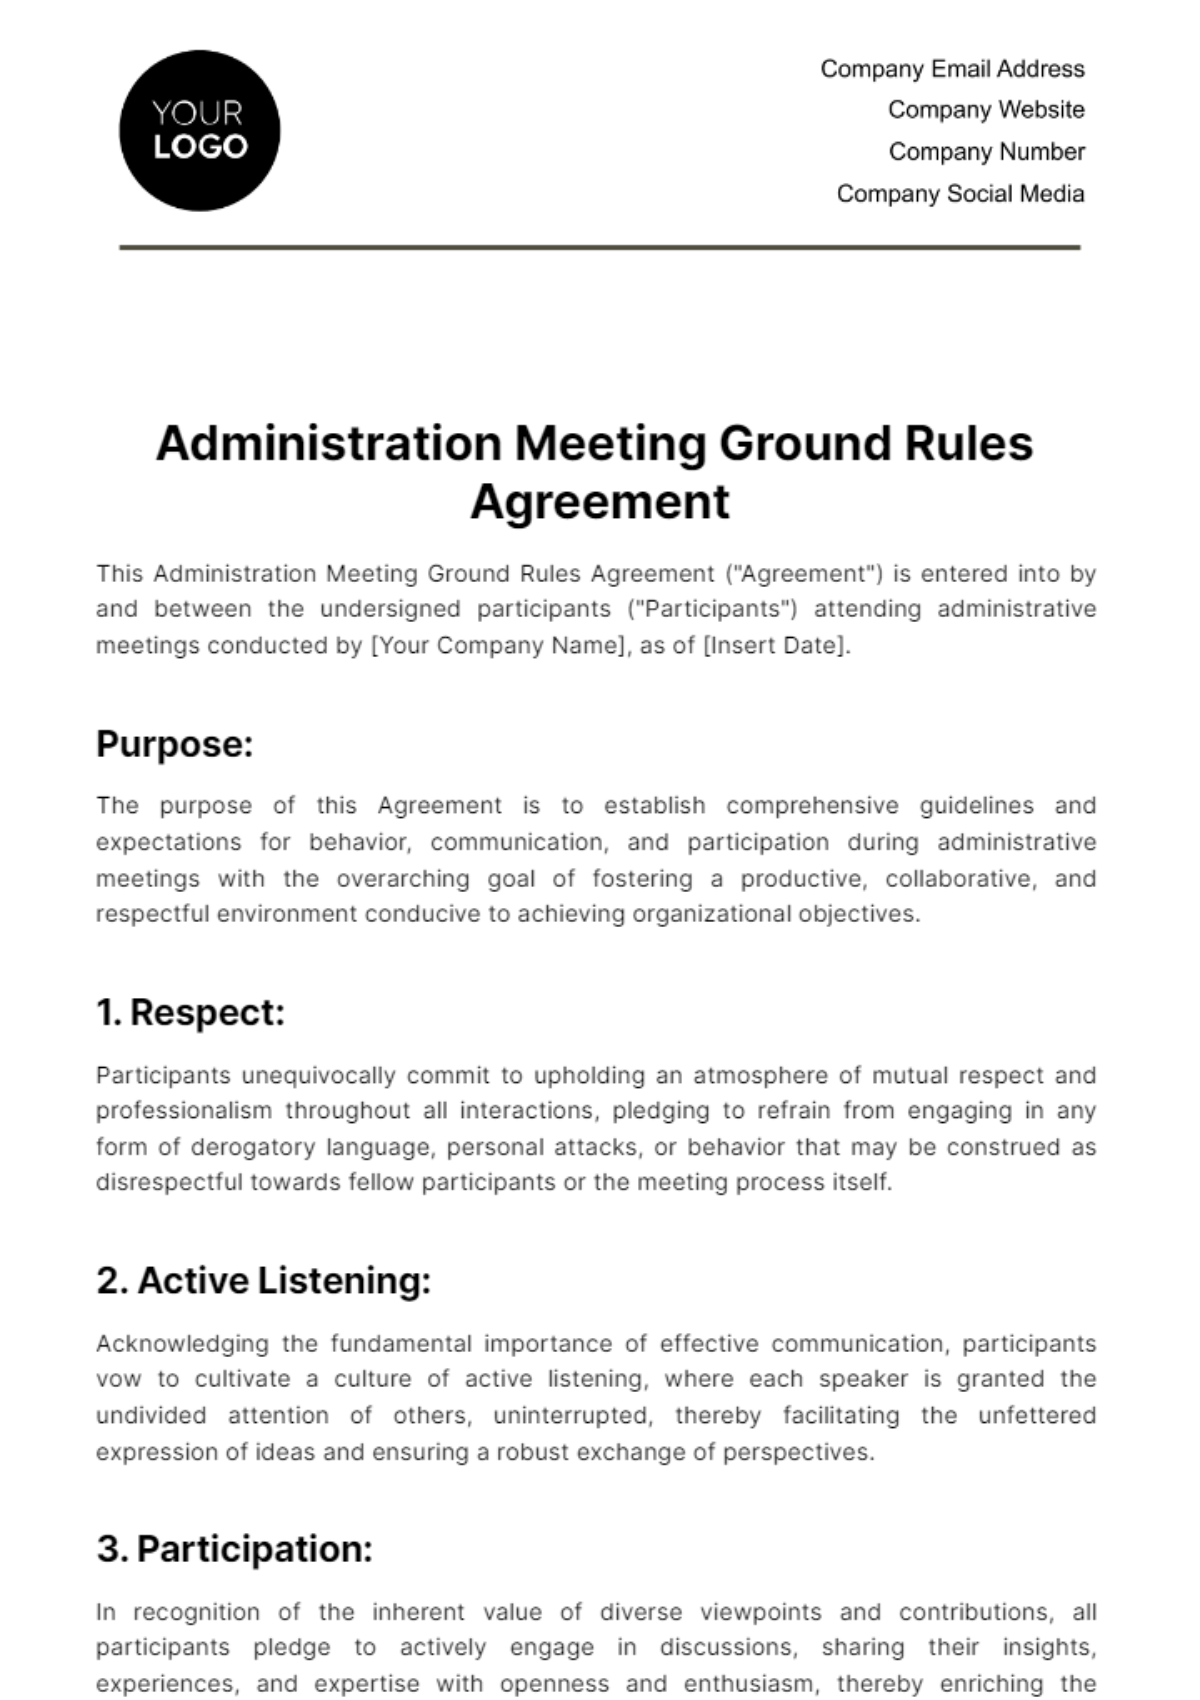 Free Administration Meeting Ground Rules Agreement Template